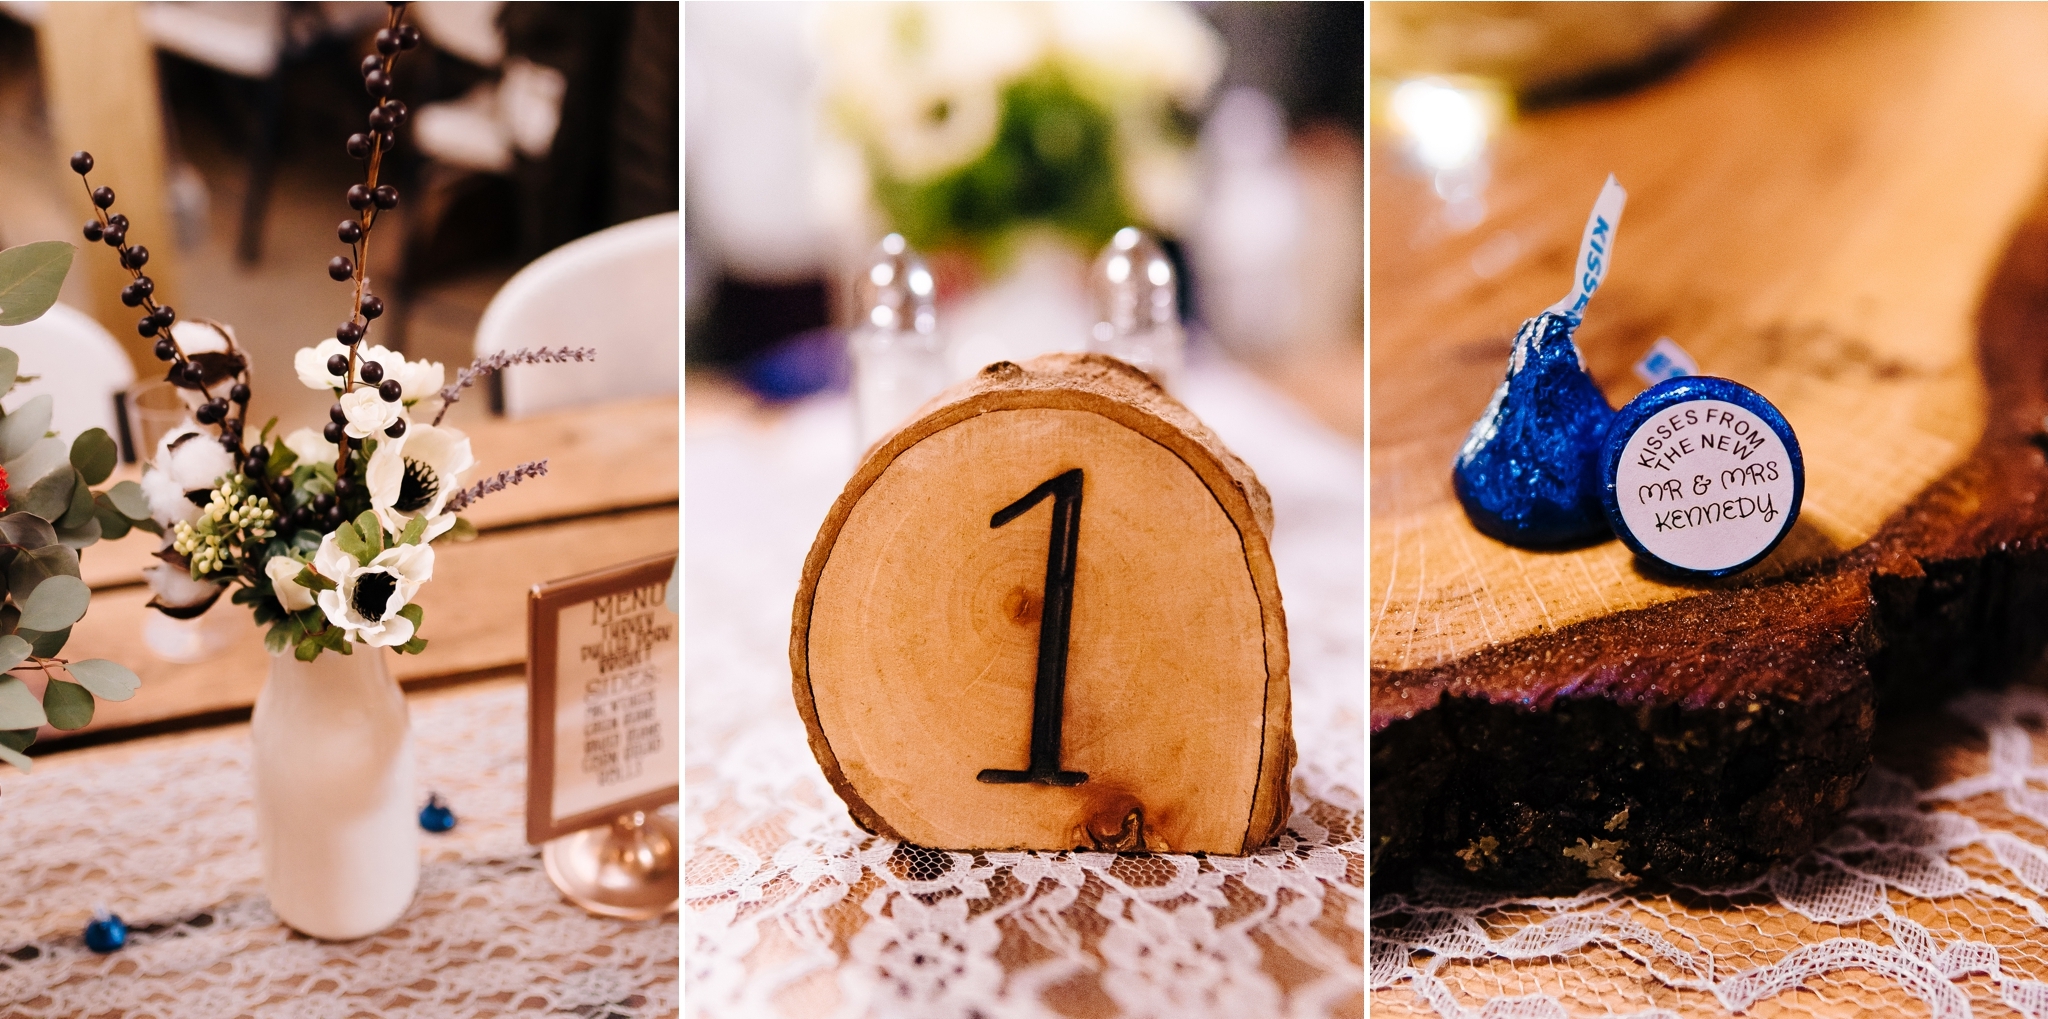 Disney_inspired_wedding_reception_details_at_wolftrap_farms_by_jonathan_and_hannah_photography